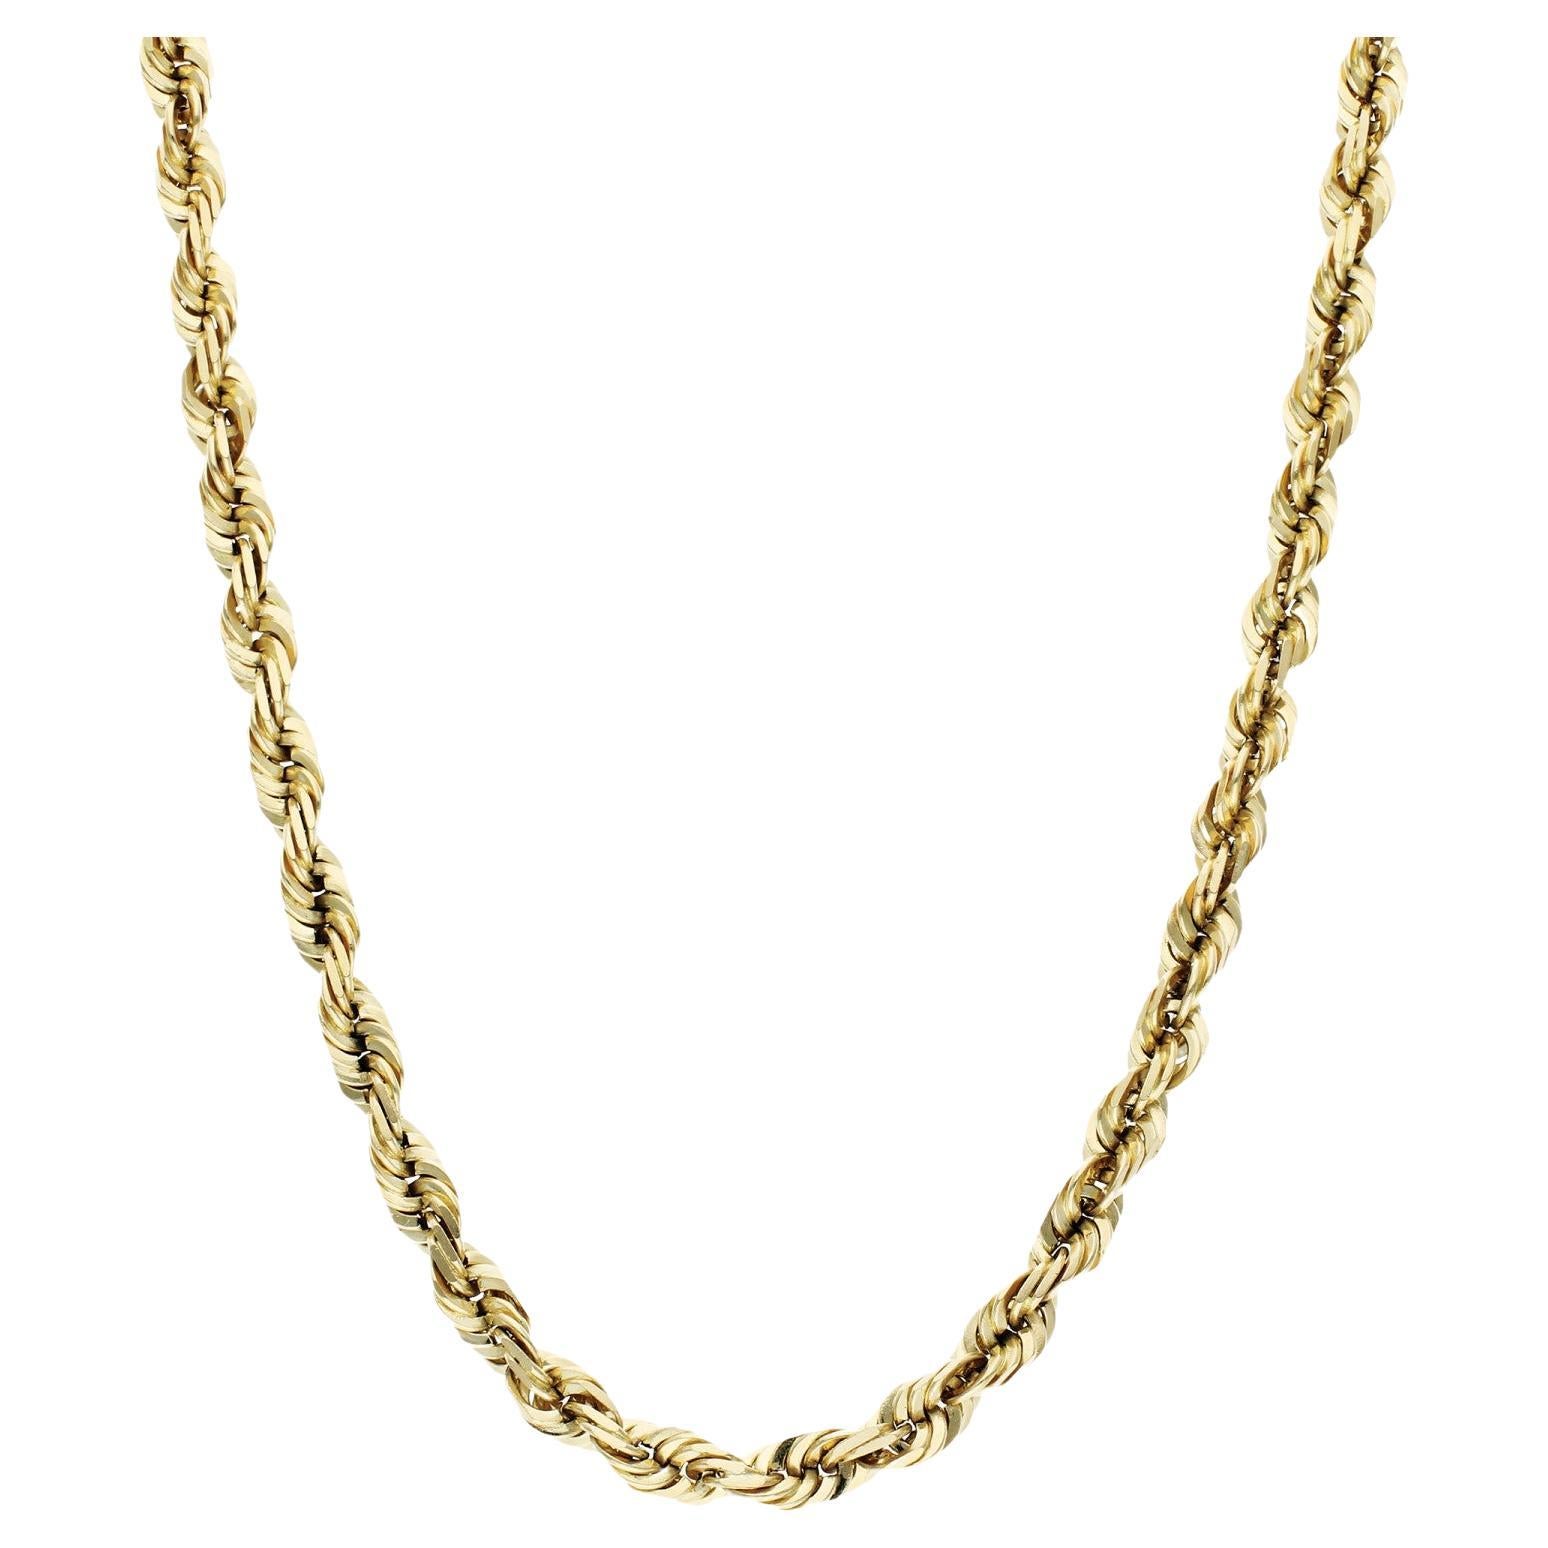 Solid 14ct Yellow Gold 30 inch Rope Chain - 64 Grams